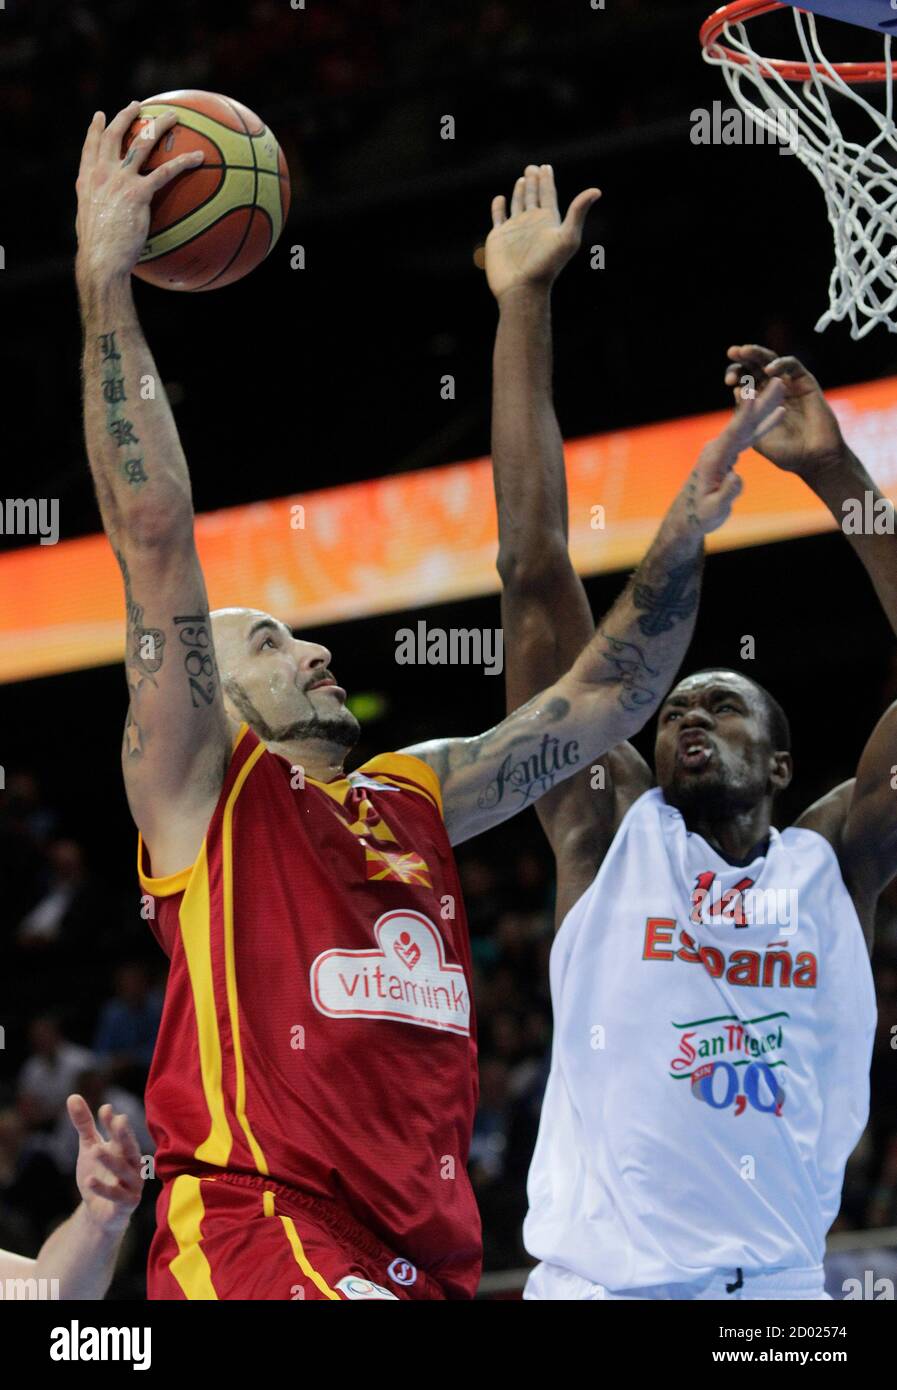 Pero Antic (L) of Macedonia goes to the basket past Serge Ibaka of Spain  during their FIBA EuroBasket 2011 semi-final basketball game in Kaunas  September 16, 2011. REUTERS/Ints Kalnins (LITHUANIA - Tags: